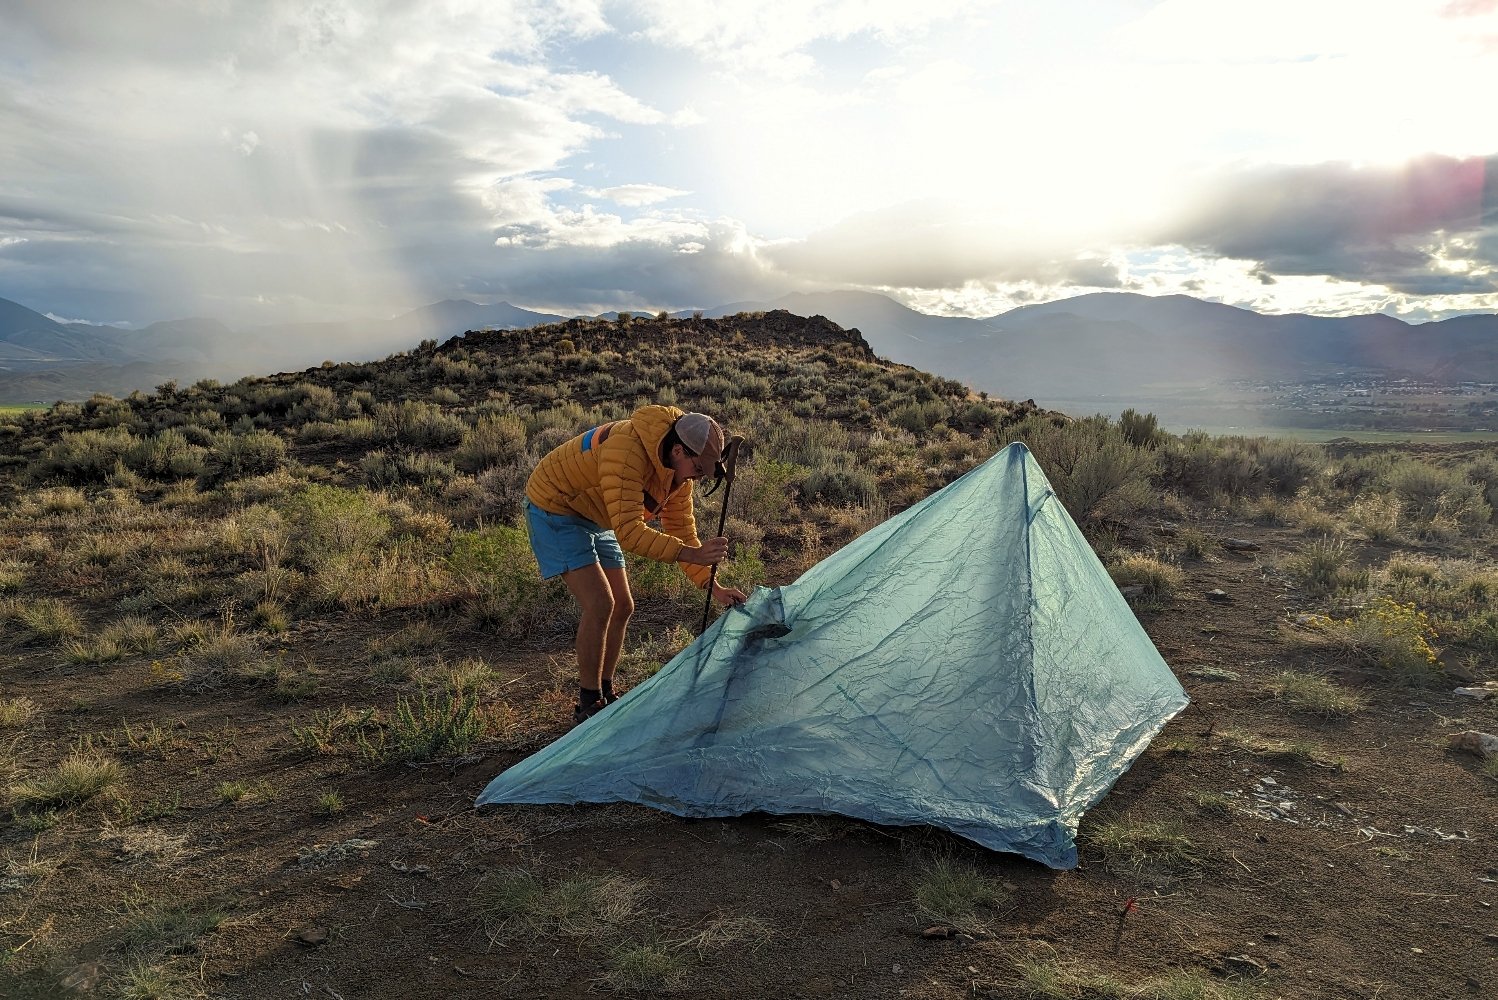 A hiker setting up the Durston X-Mid 2 Pro tent in a brushy desert campsite as a light rain approaches